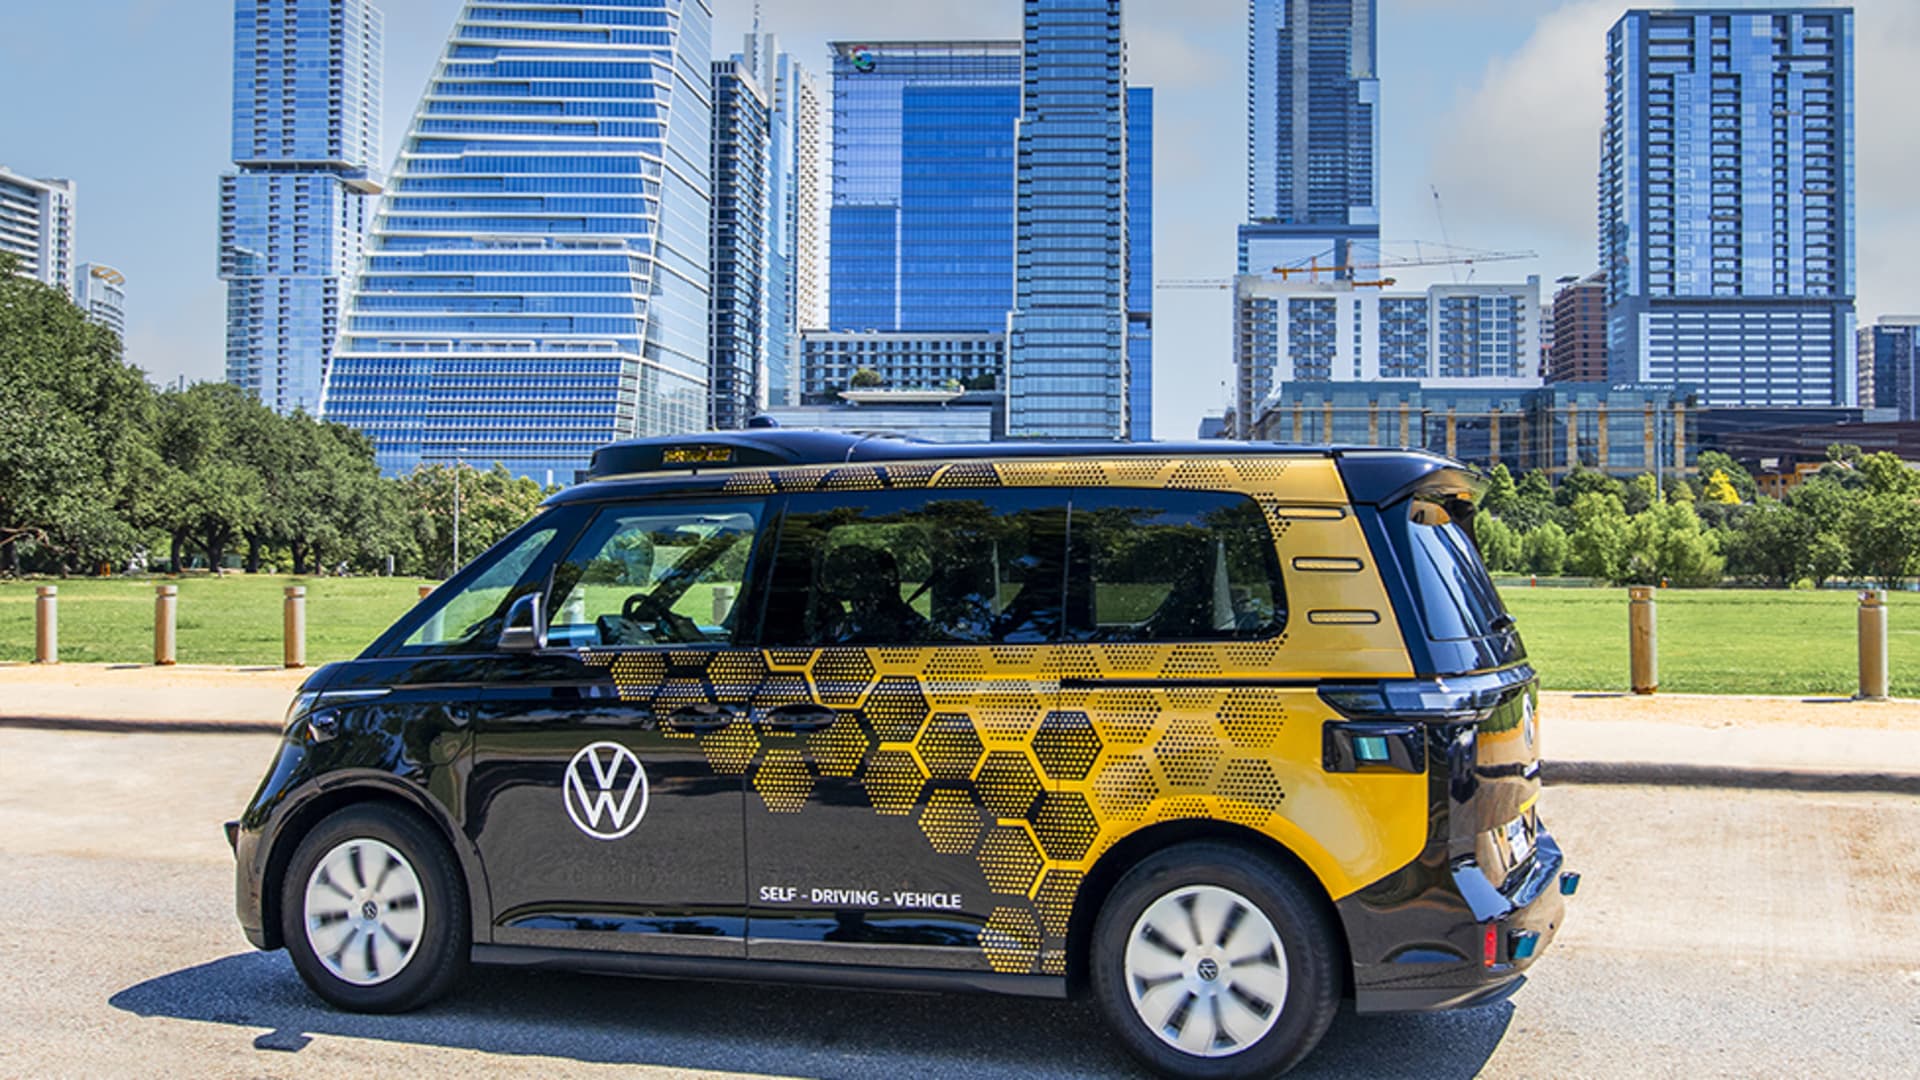 Volkswagen will start testing self-driving cars in Austin as it moves on from Argo AI